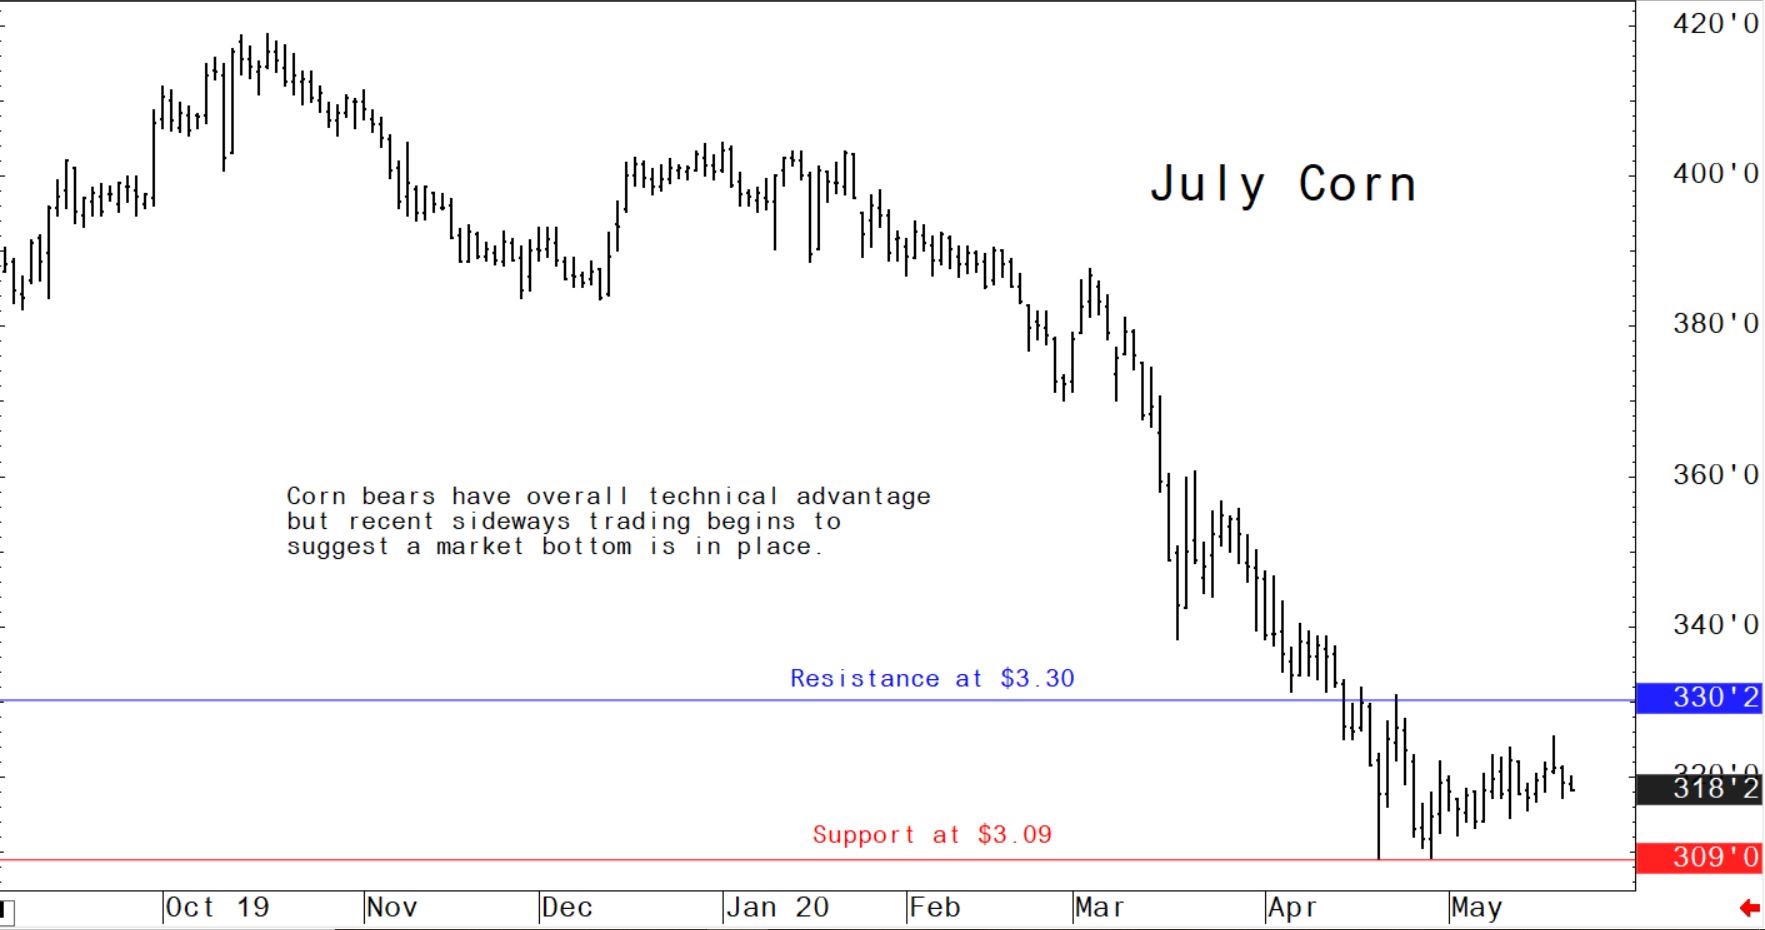 Corn bears have overall technical advantage but recent sideways trading begins to suggest a market bottom is in place.